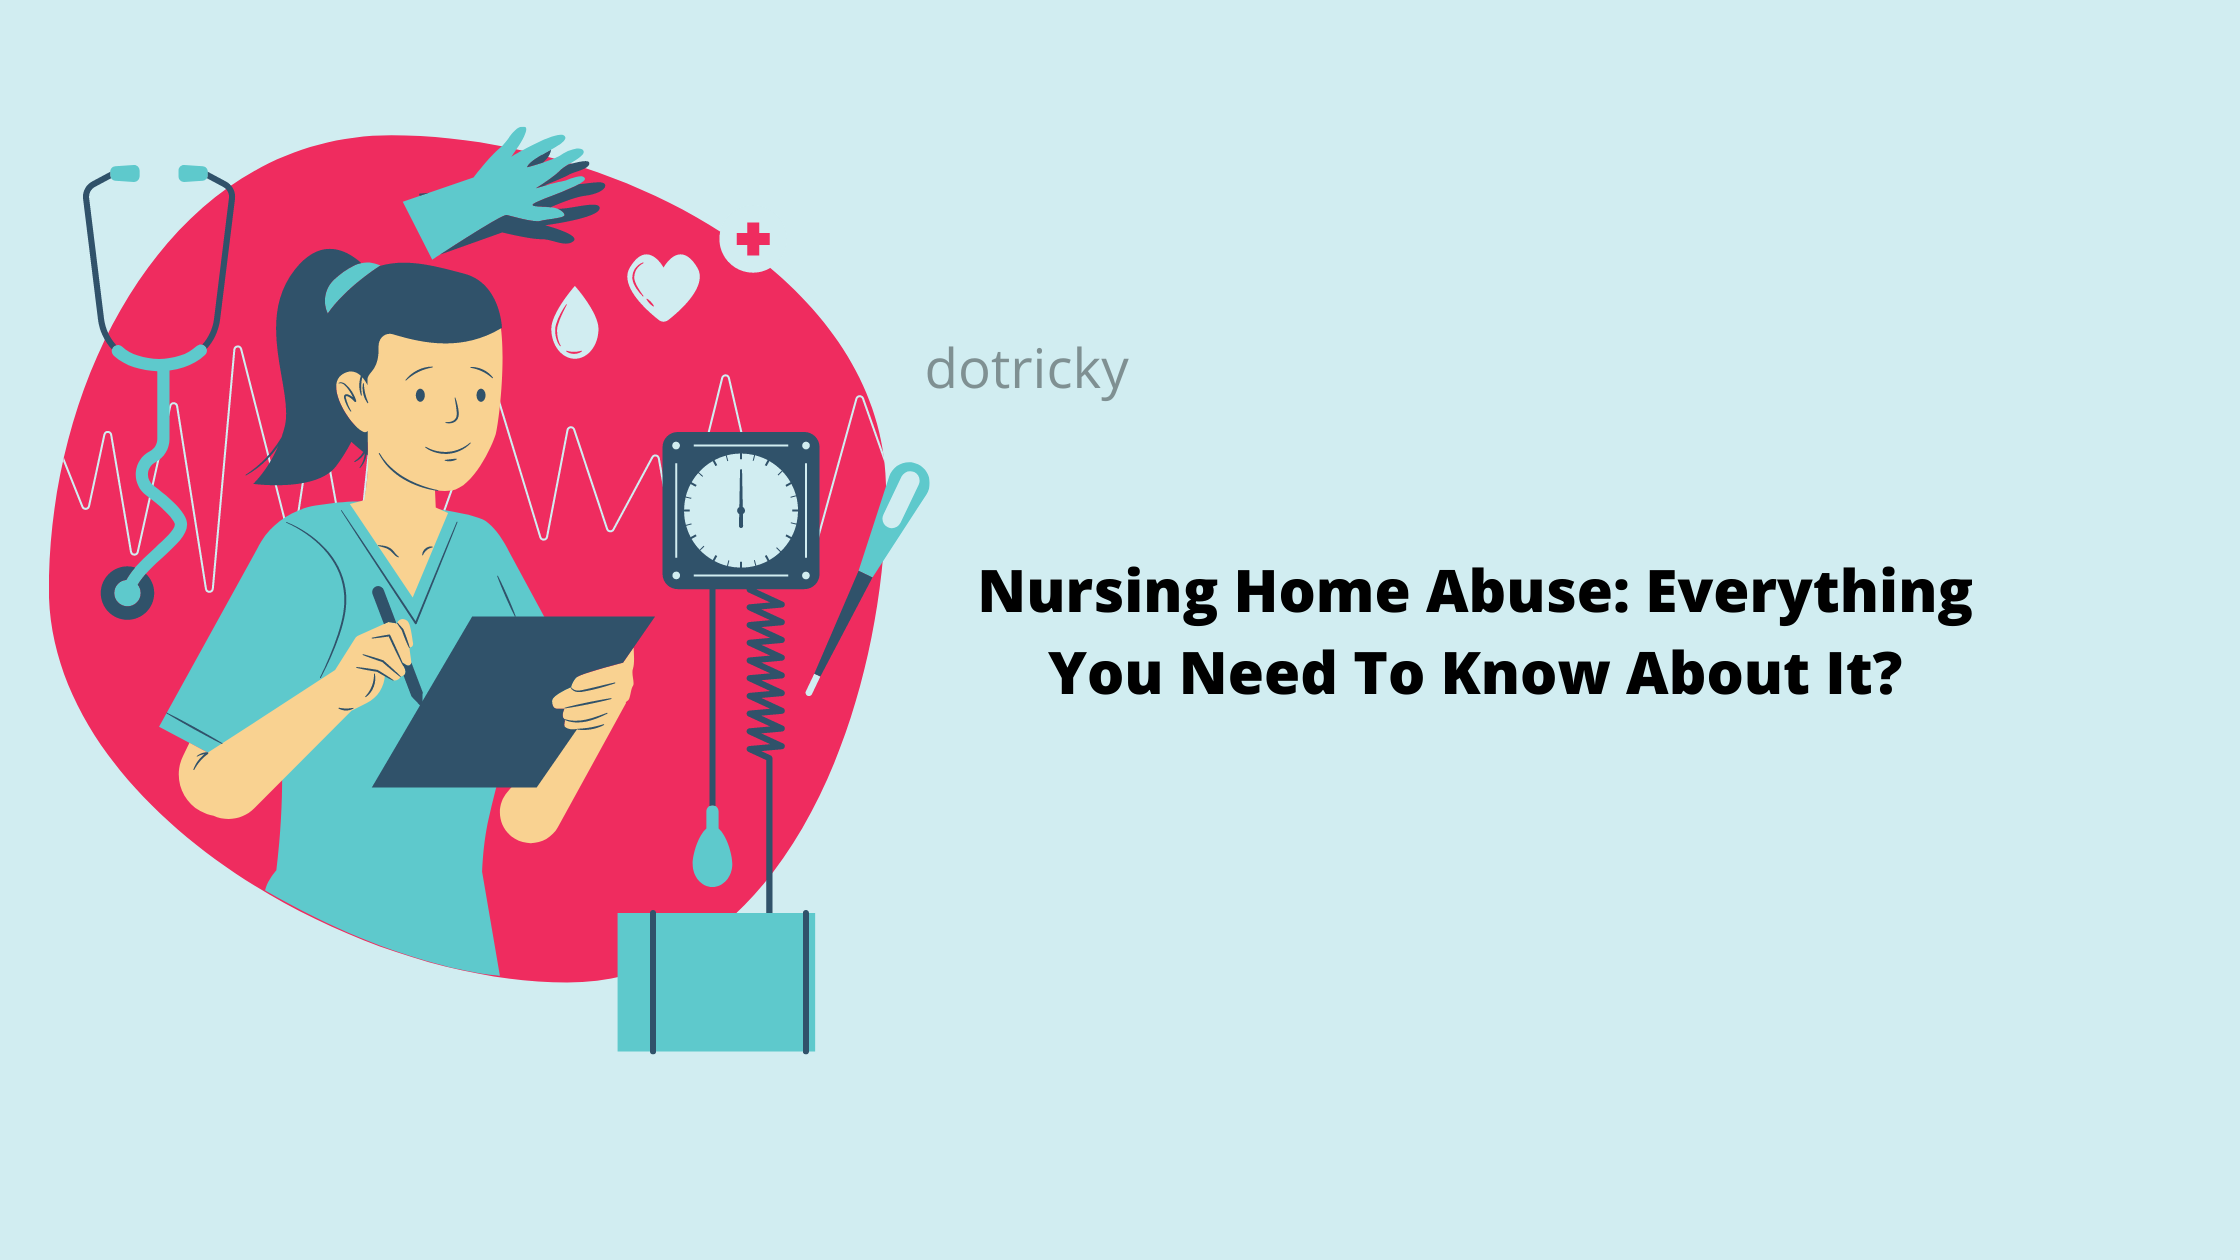 Nursing Home Abuse: Everything You Need To Know About It?